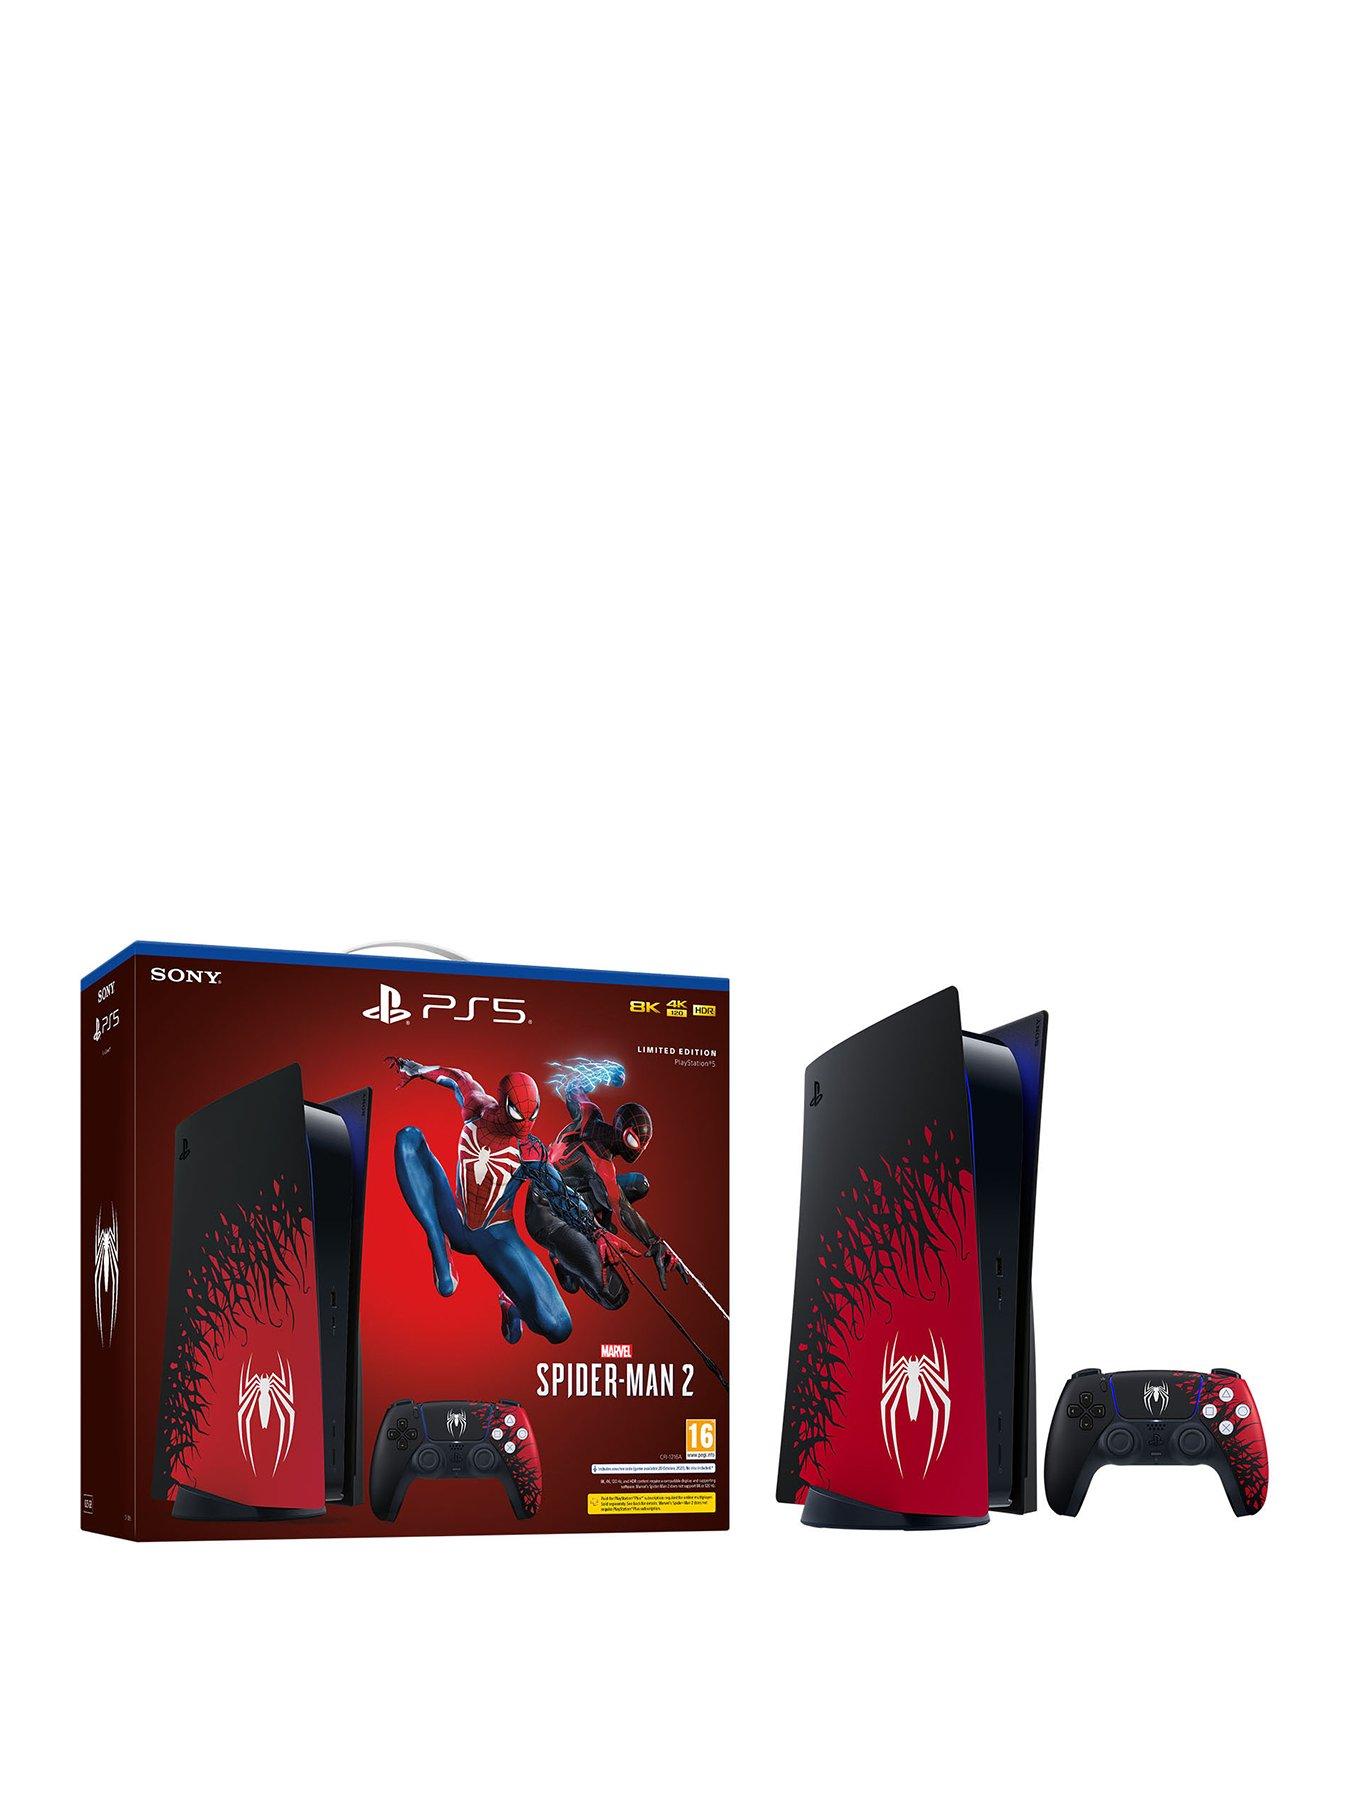 2023 New PlayStation 5 Disc Version PS5 Console with Wireless Controller &  Marvel's Spider-Man: Miles Morales Game 